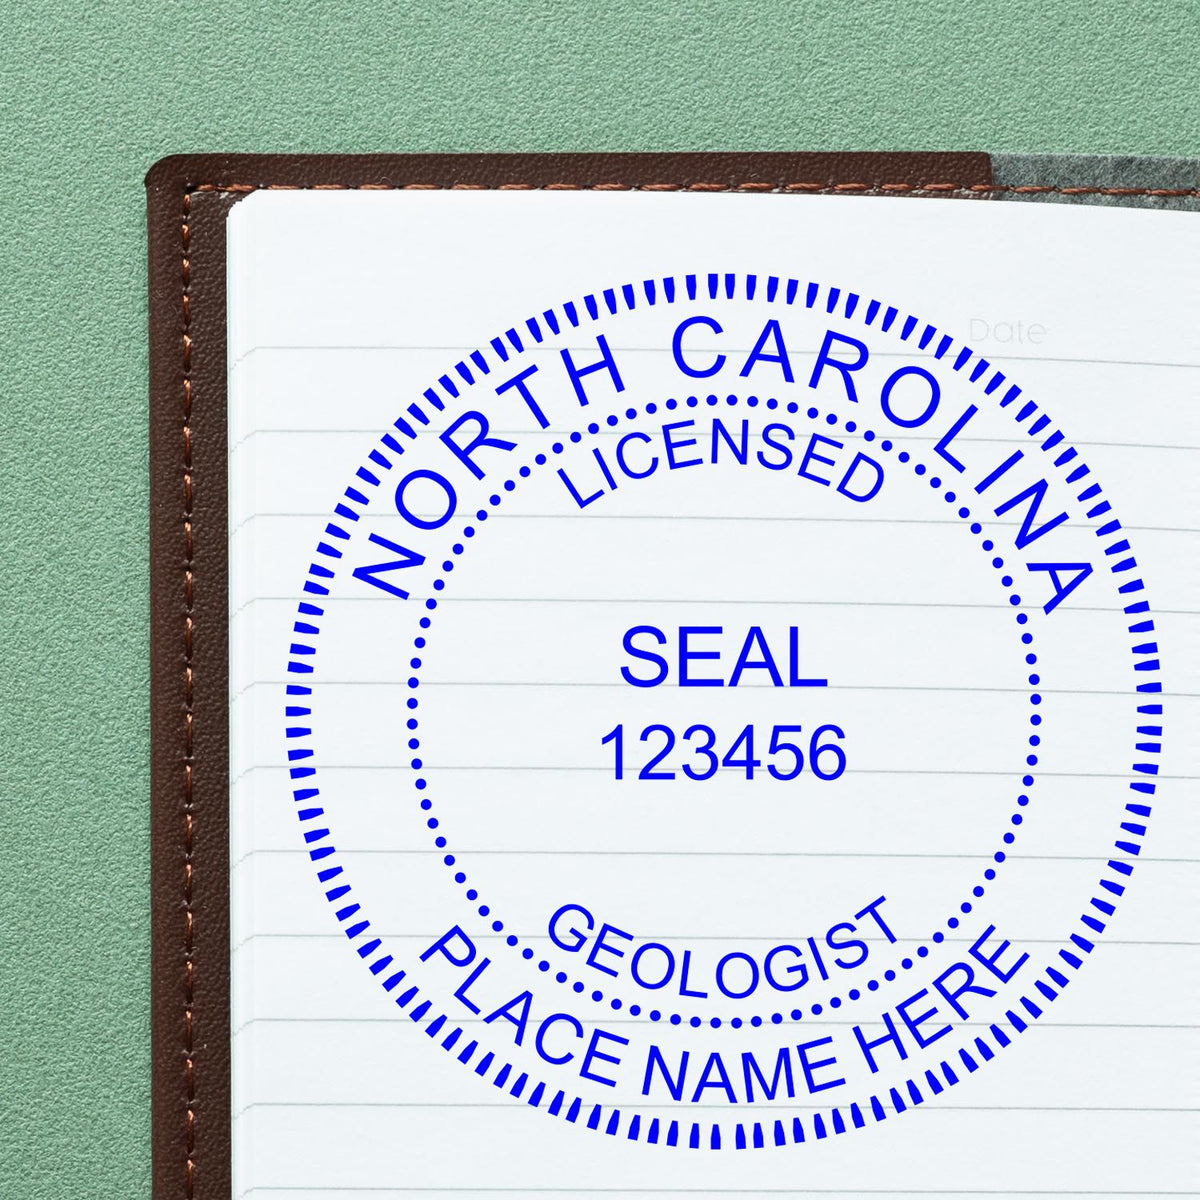 Another Example of a stamped impression of the Premium MaxLight Pre-Inked North Carolina Geology Stamp on a office form